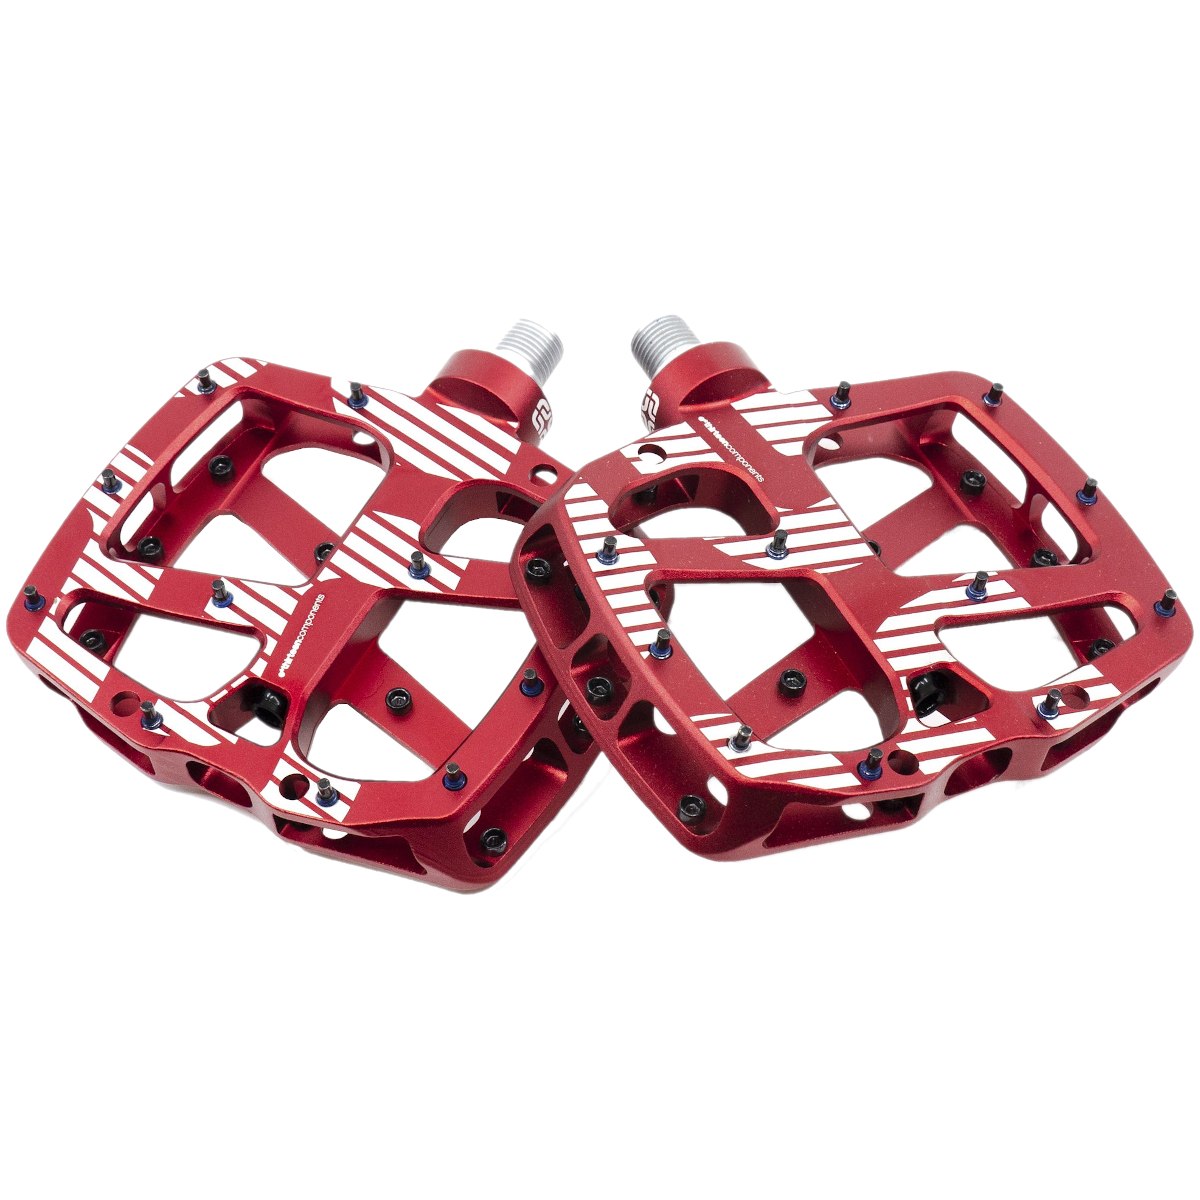 Picture of e*thirteen Plus Flat Pedals - red